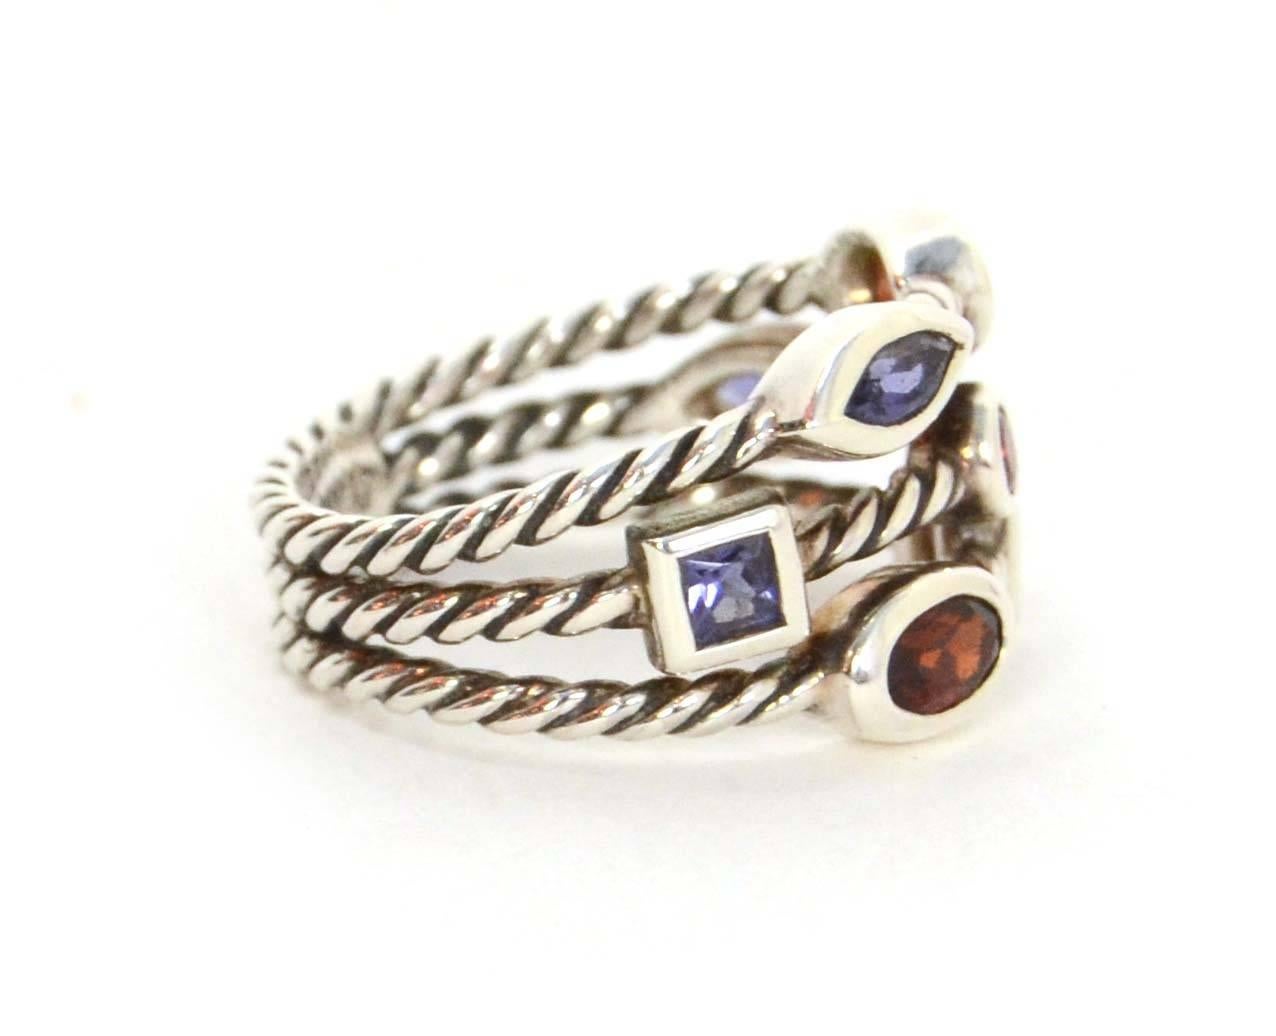 David Yurman Sterling & Multi-Colored Stone Confetti Ring 
Features different shapes and colored stones
Color: Purple, pink, red, and silver
Materials: Stone and sterling silver
Closure: None
Stamp: DY 925
Overall Condition: Excellent